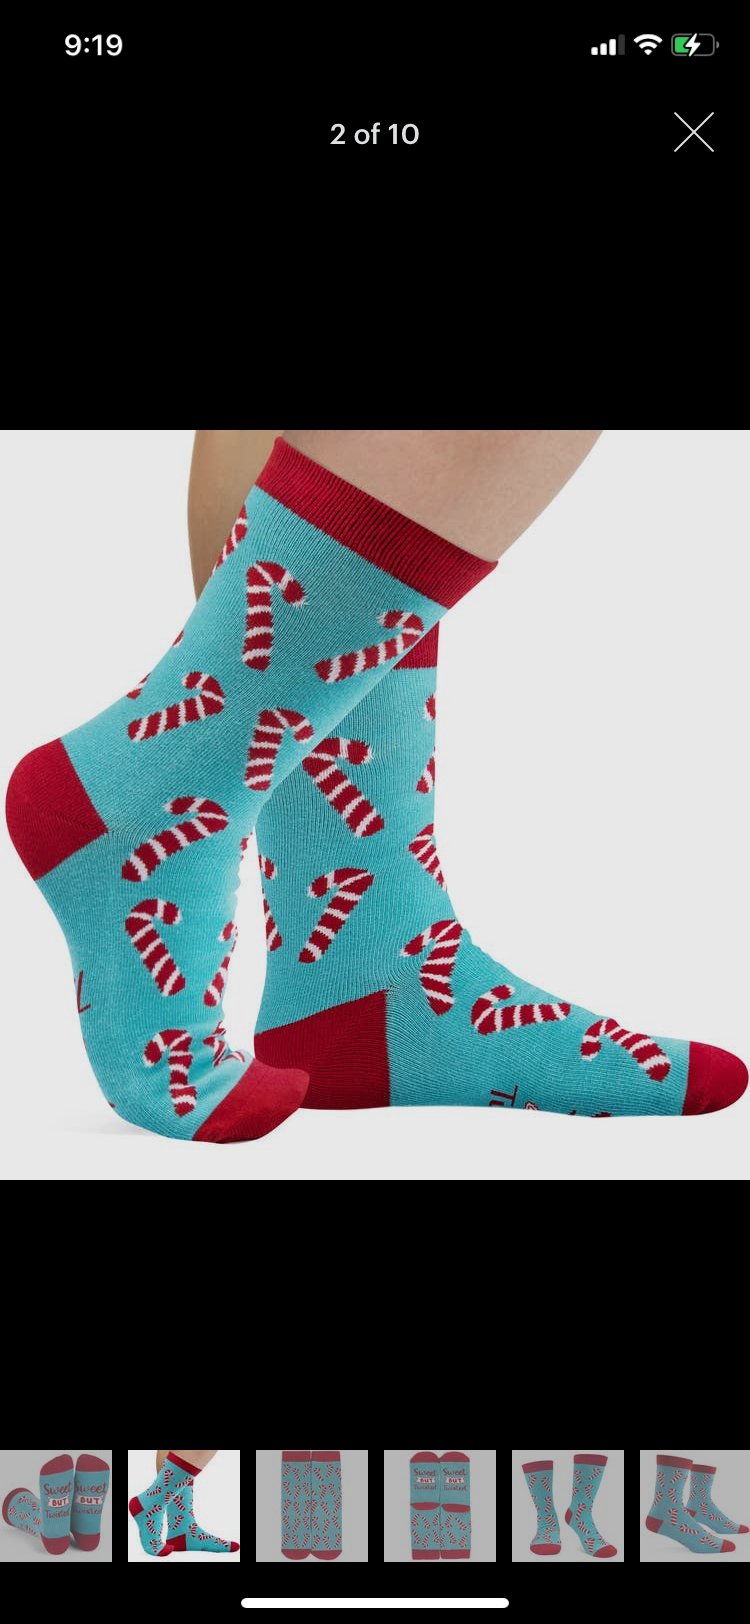 Sweet but Twisted (candy cane) Christmas Socks